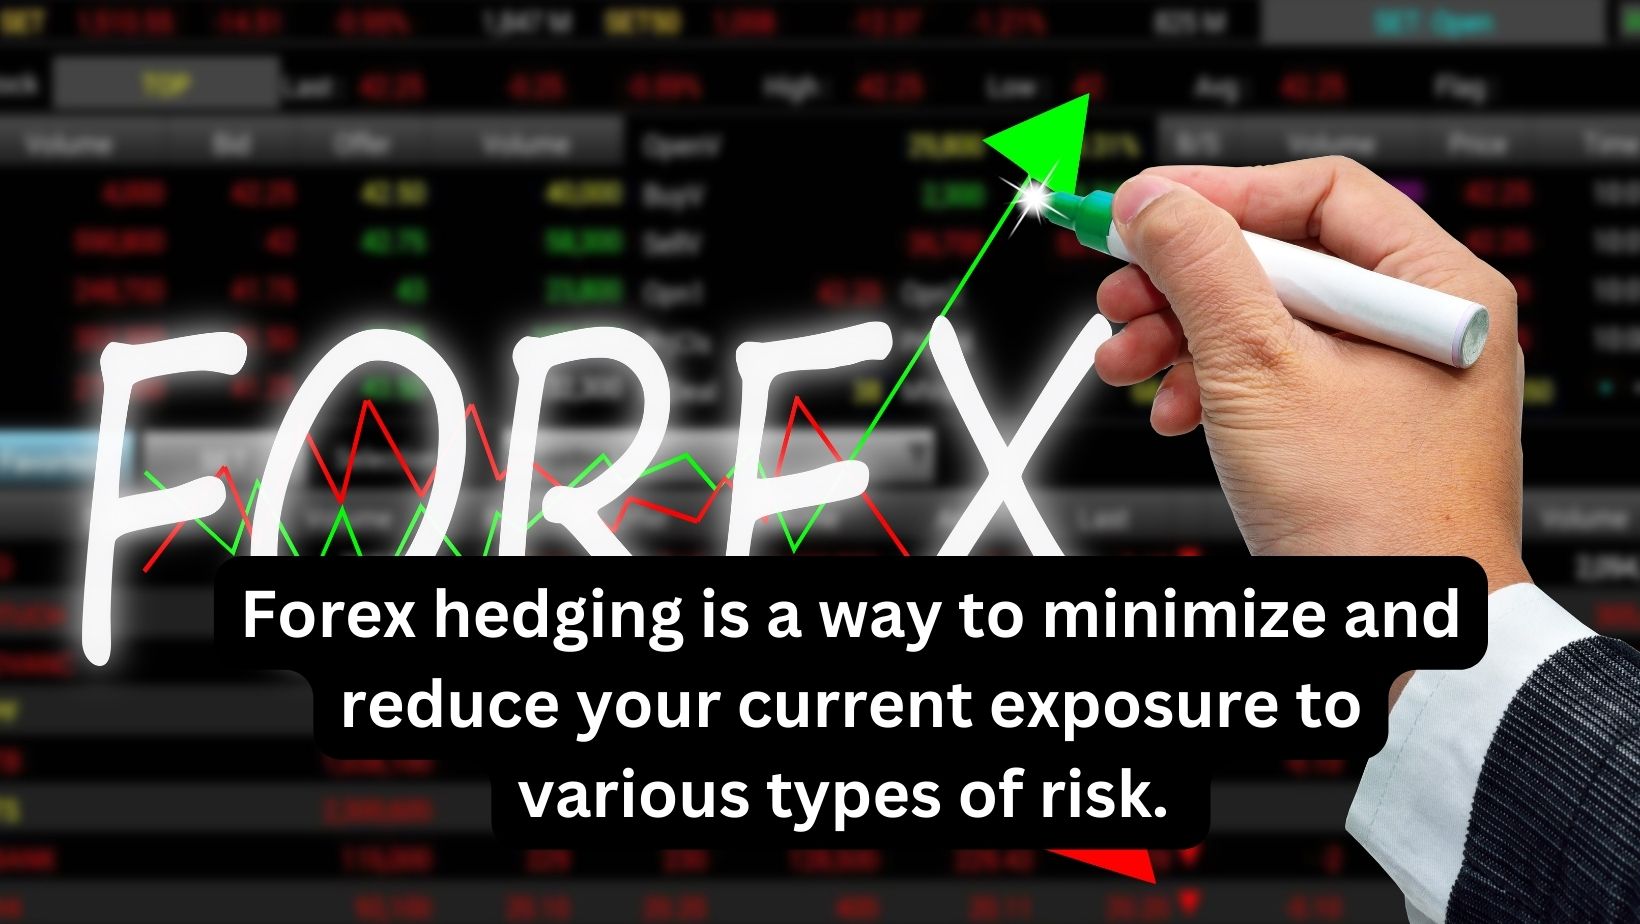 Forex hedging is a way to minimize and reduce your current exposure to various types of risk